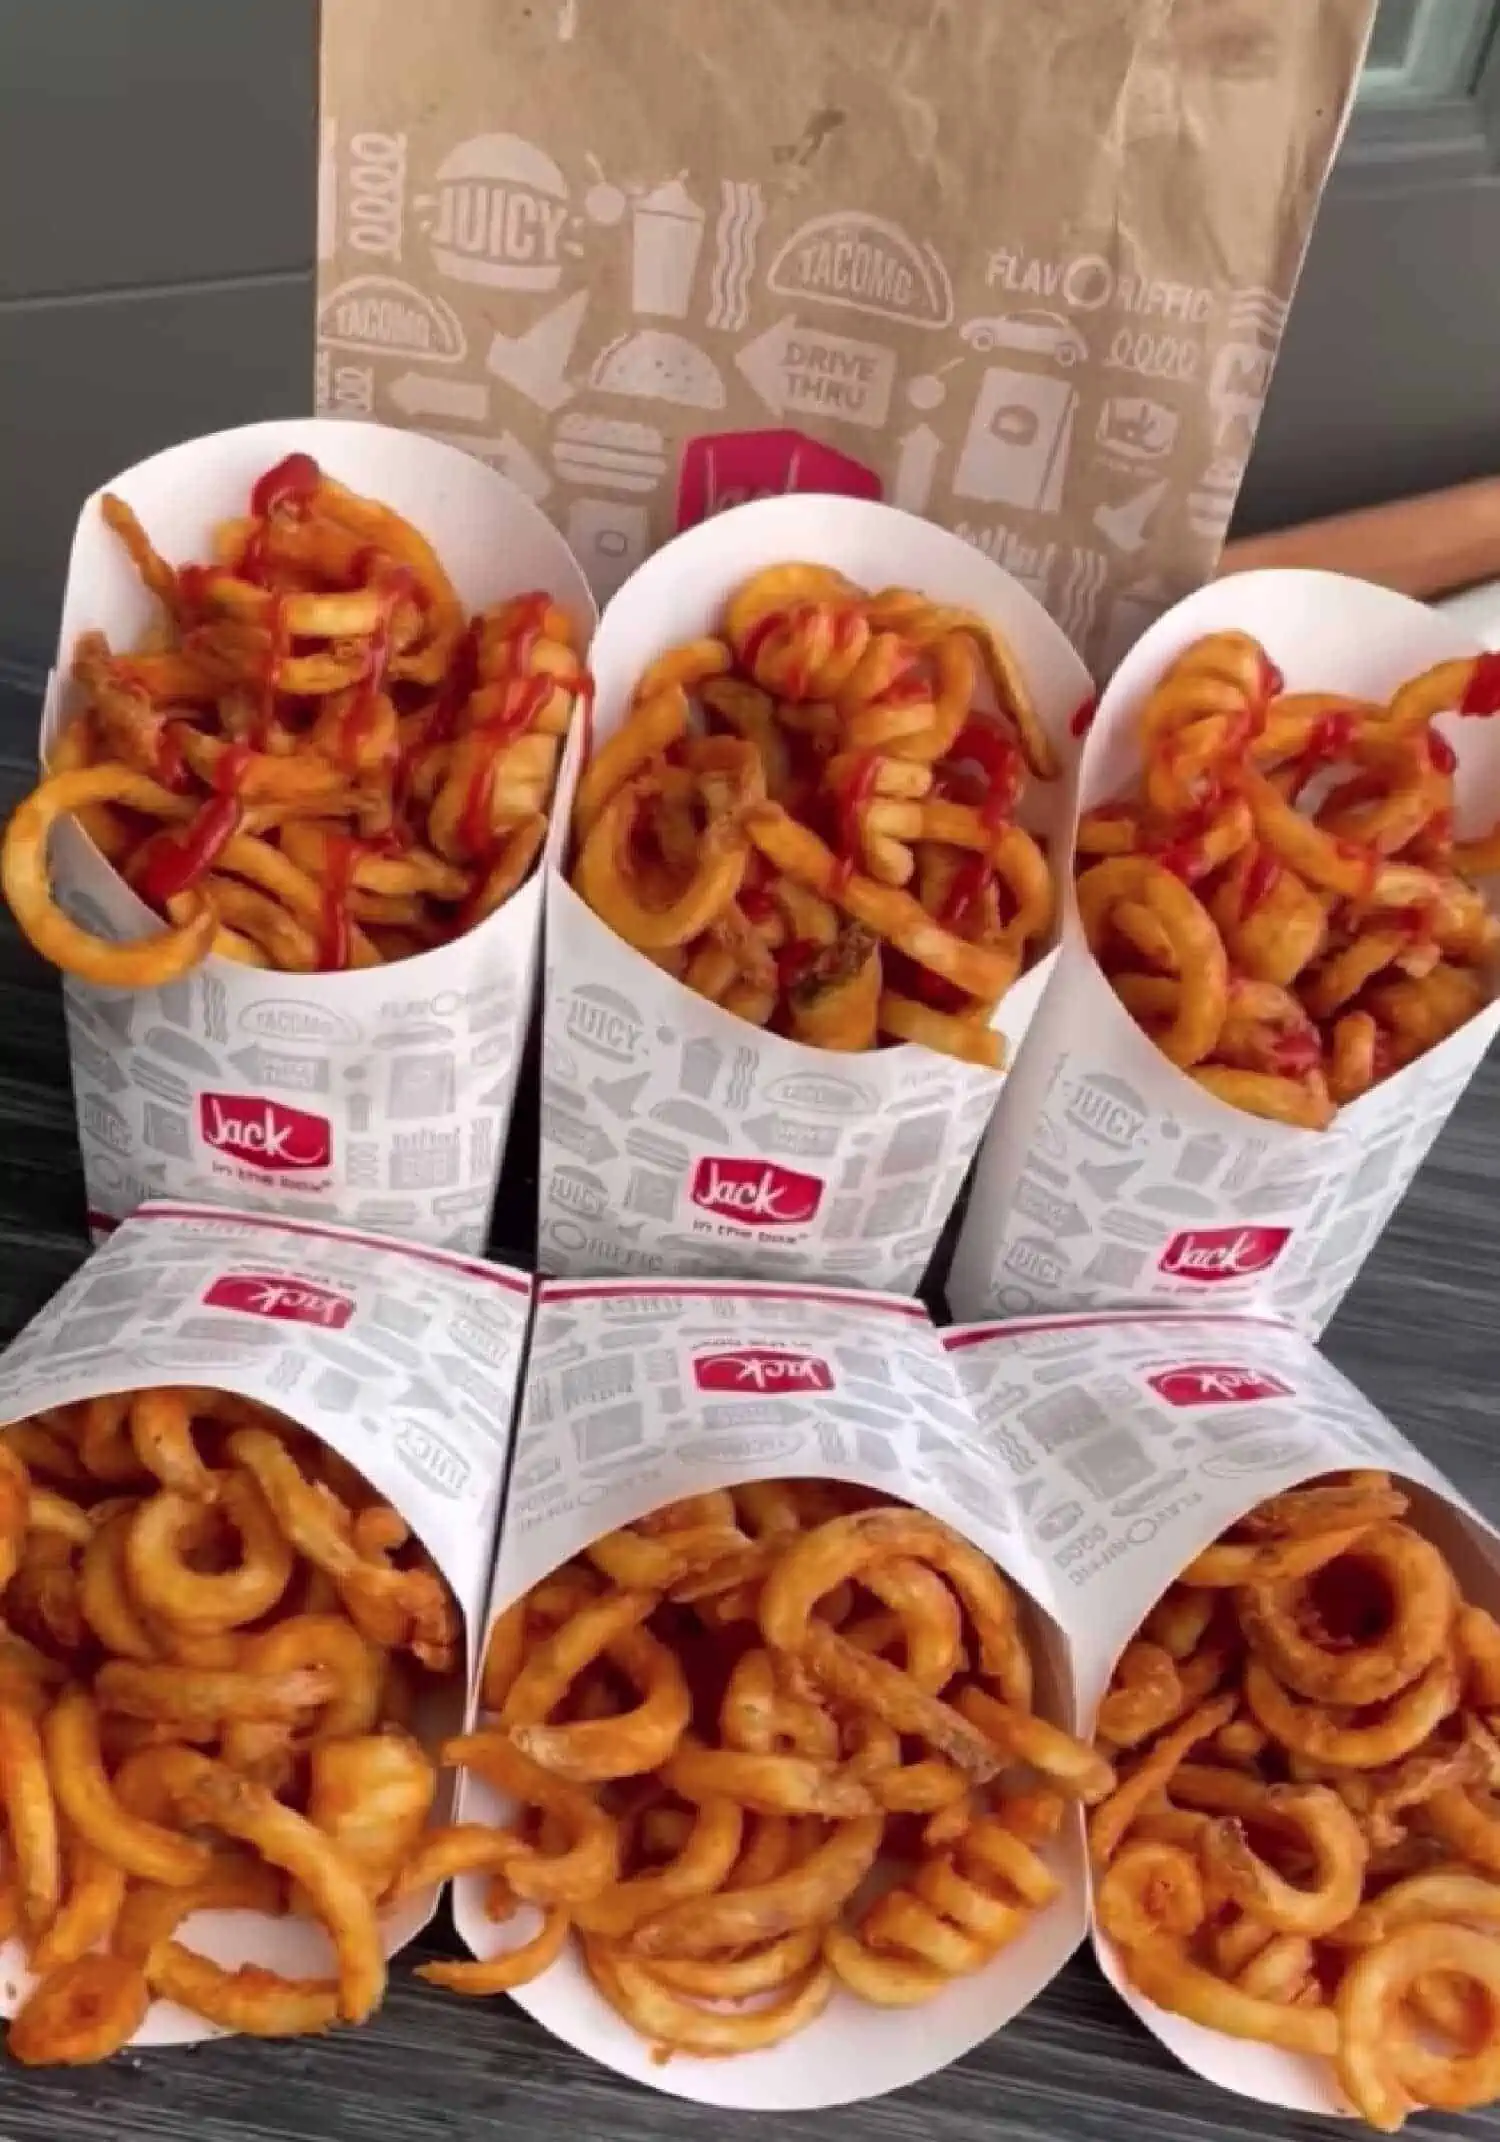 Six white boxes of Jack in the Box curly fries (some with ketchup) next to a brown take out bag from the restaurant.